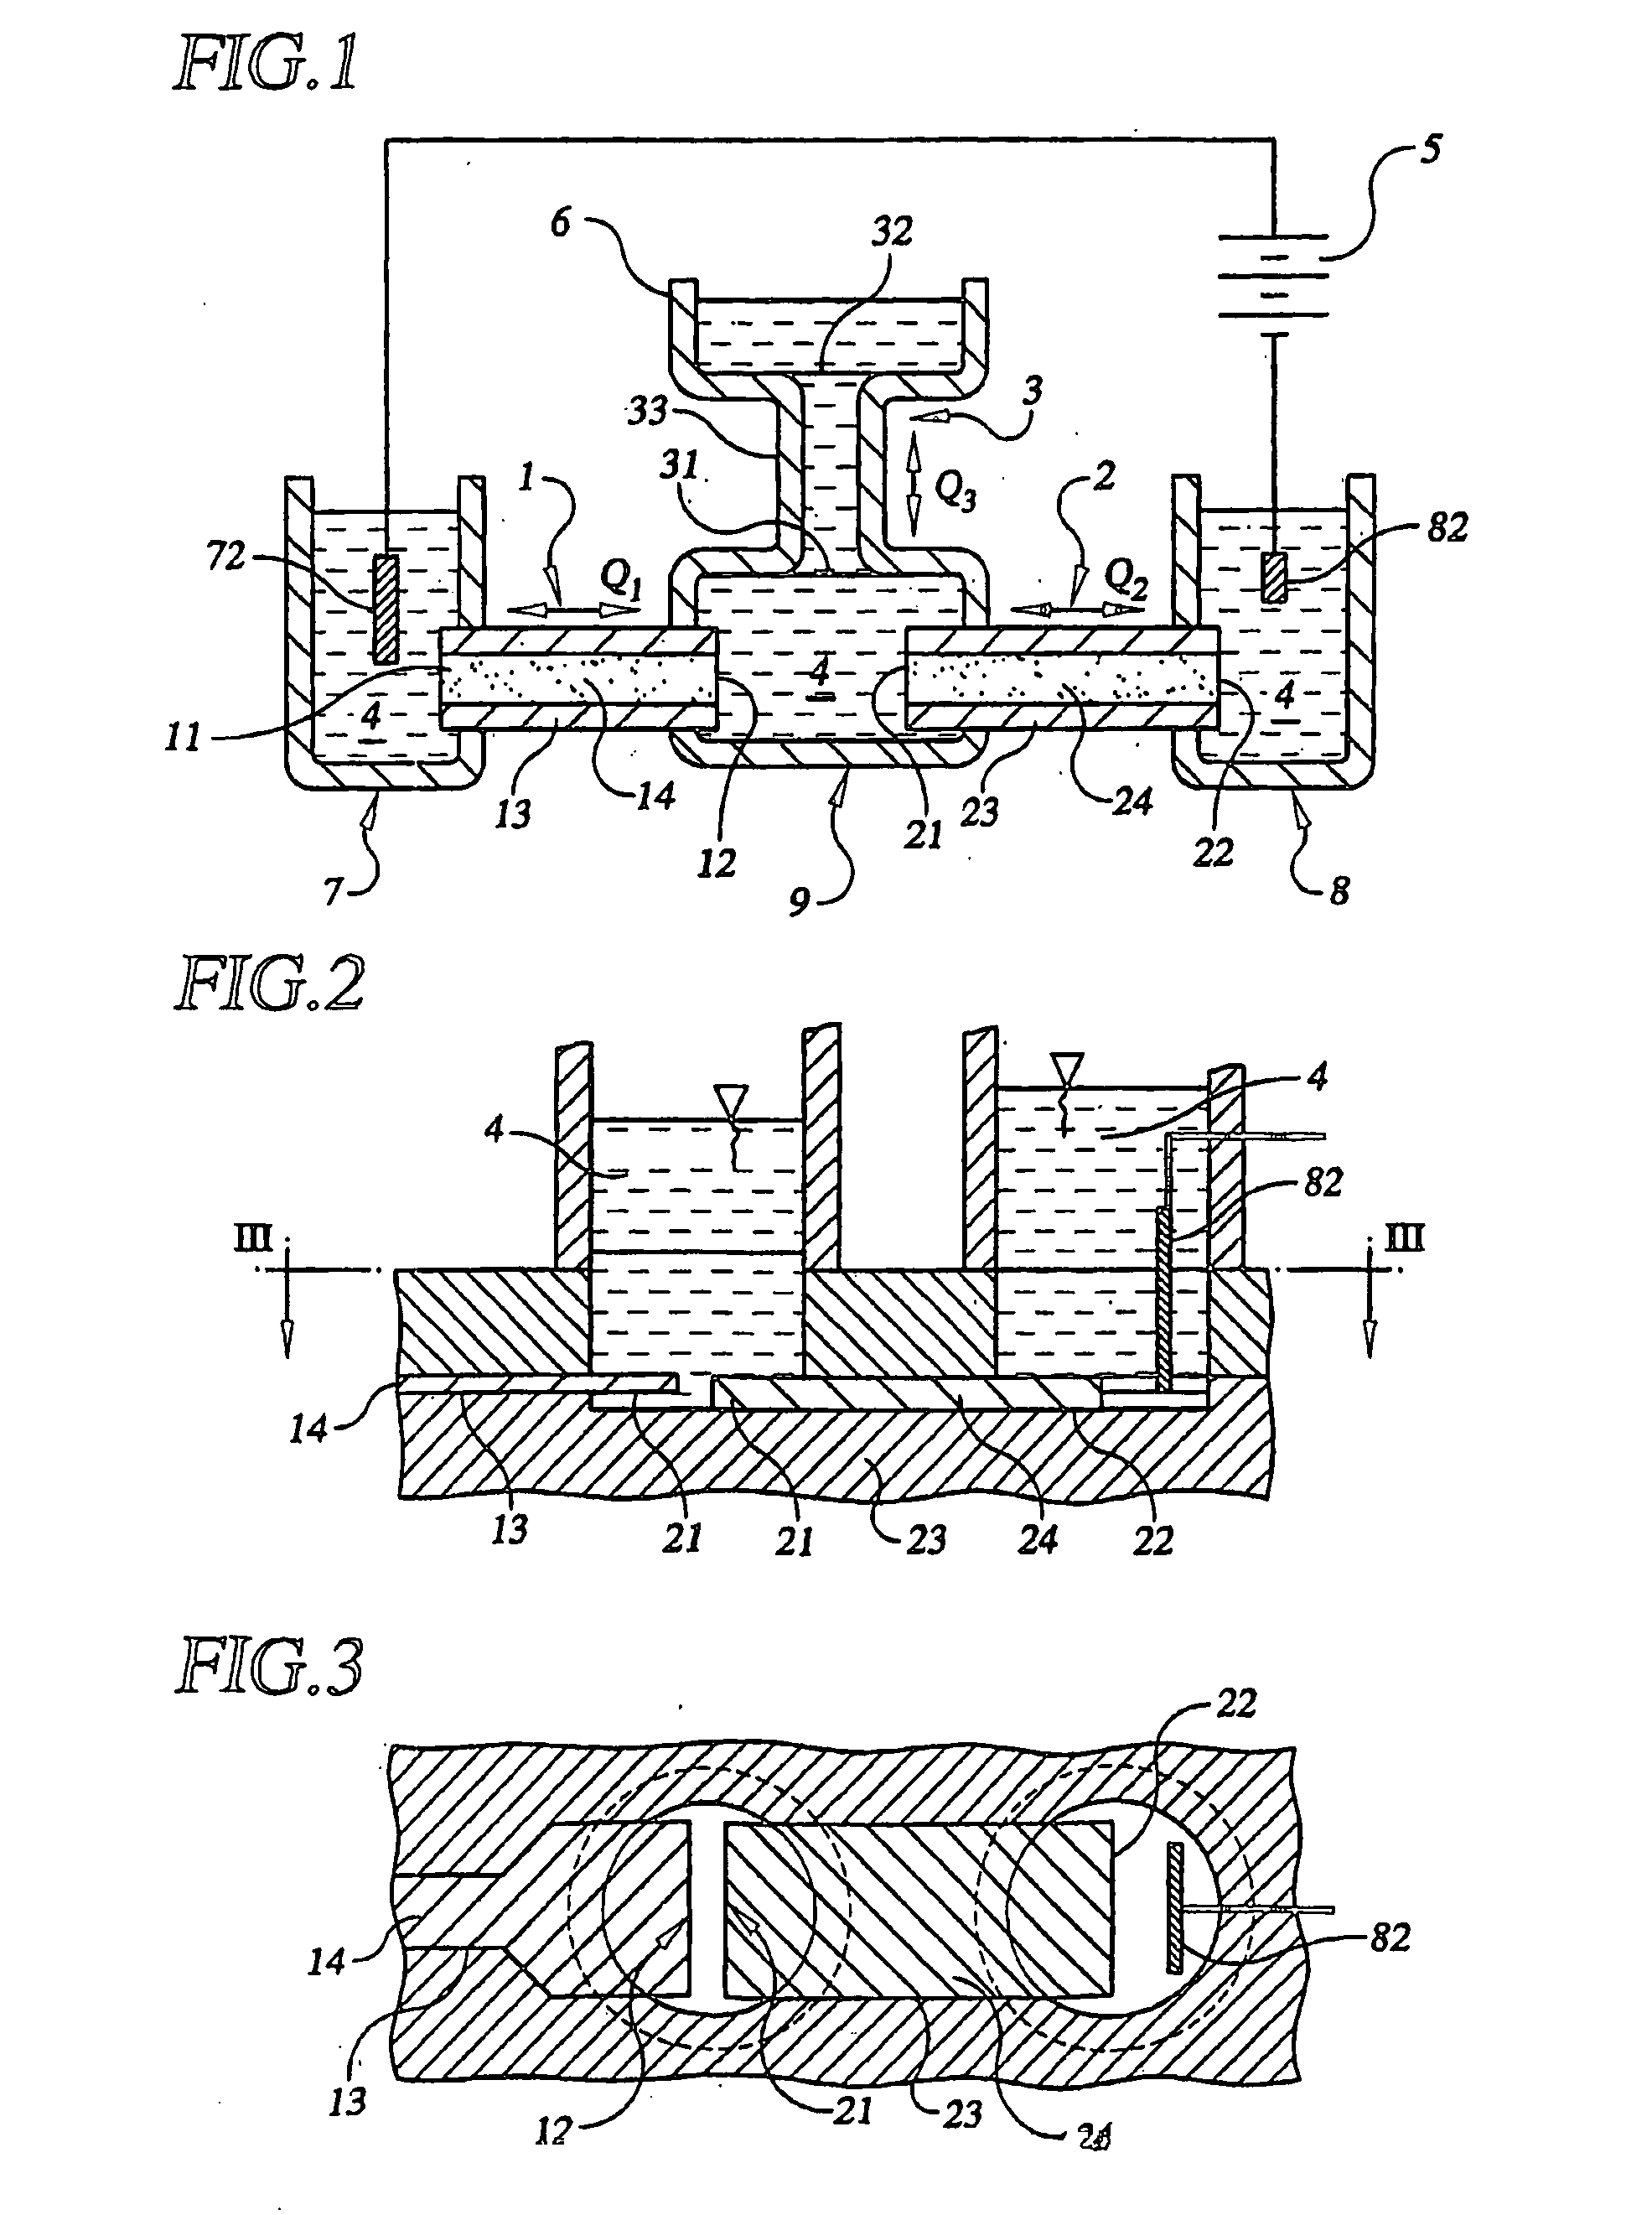 Electroosmotic flow systems